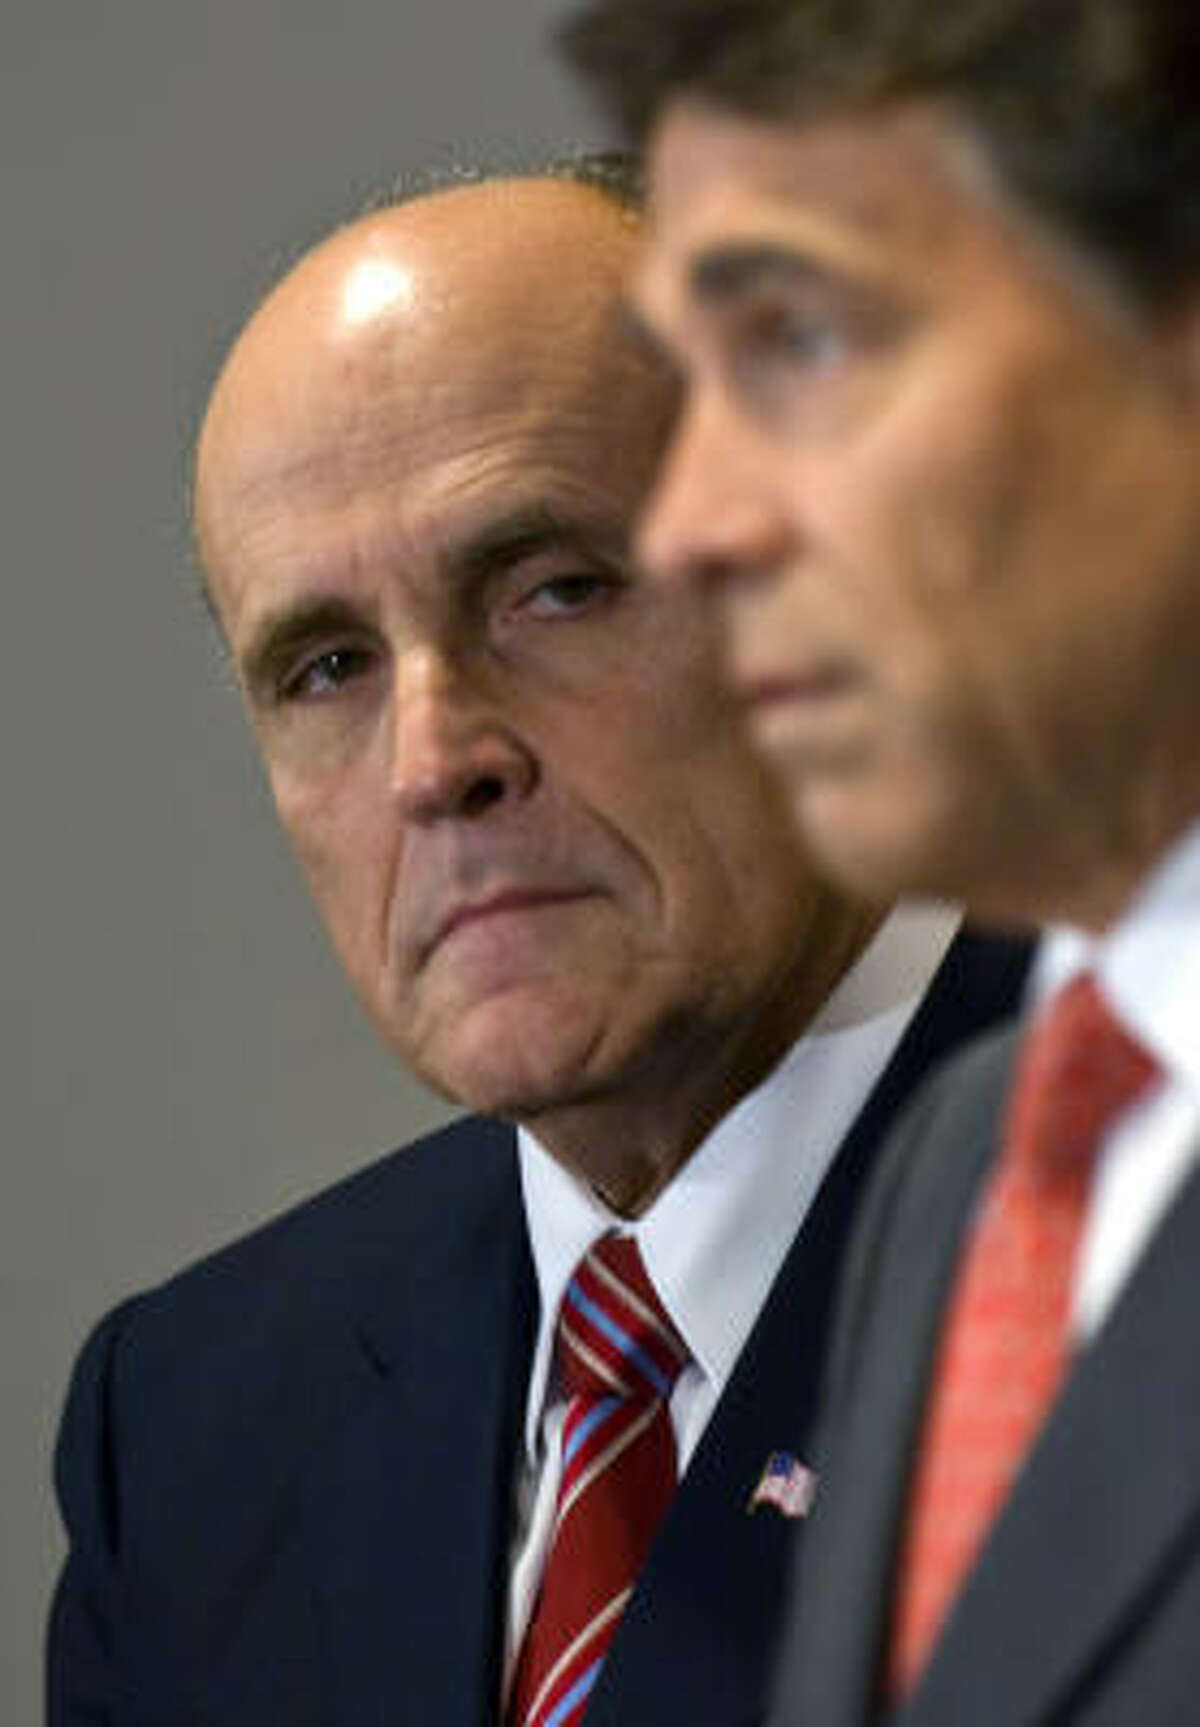 Gov. Rick Perry says Rudy Giuliani "knows how to win.''